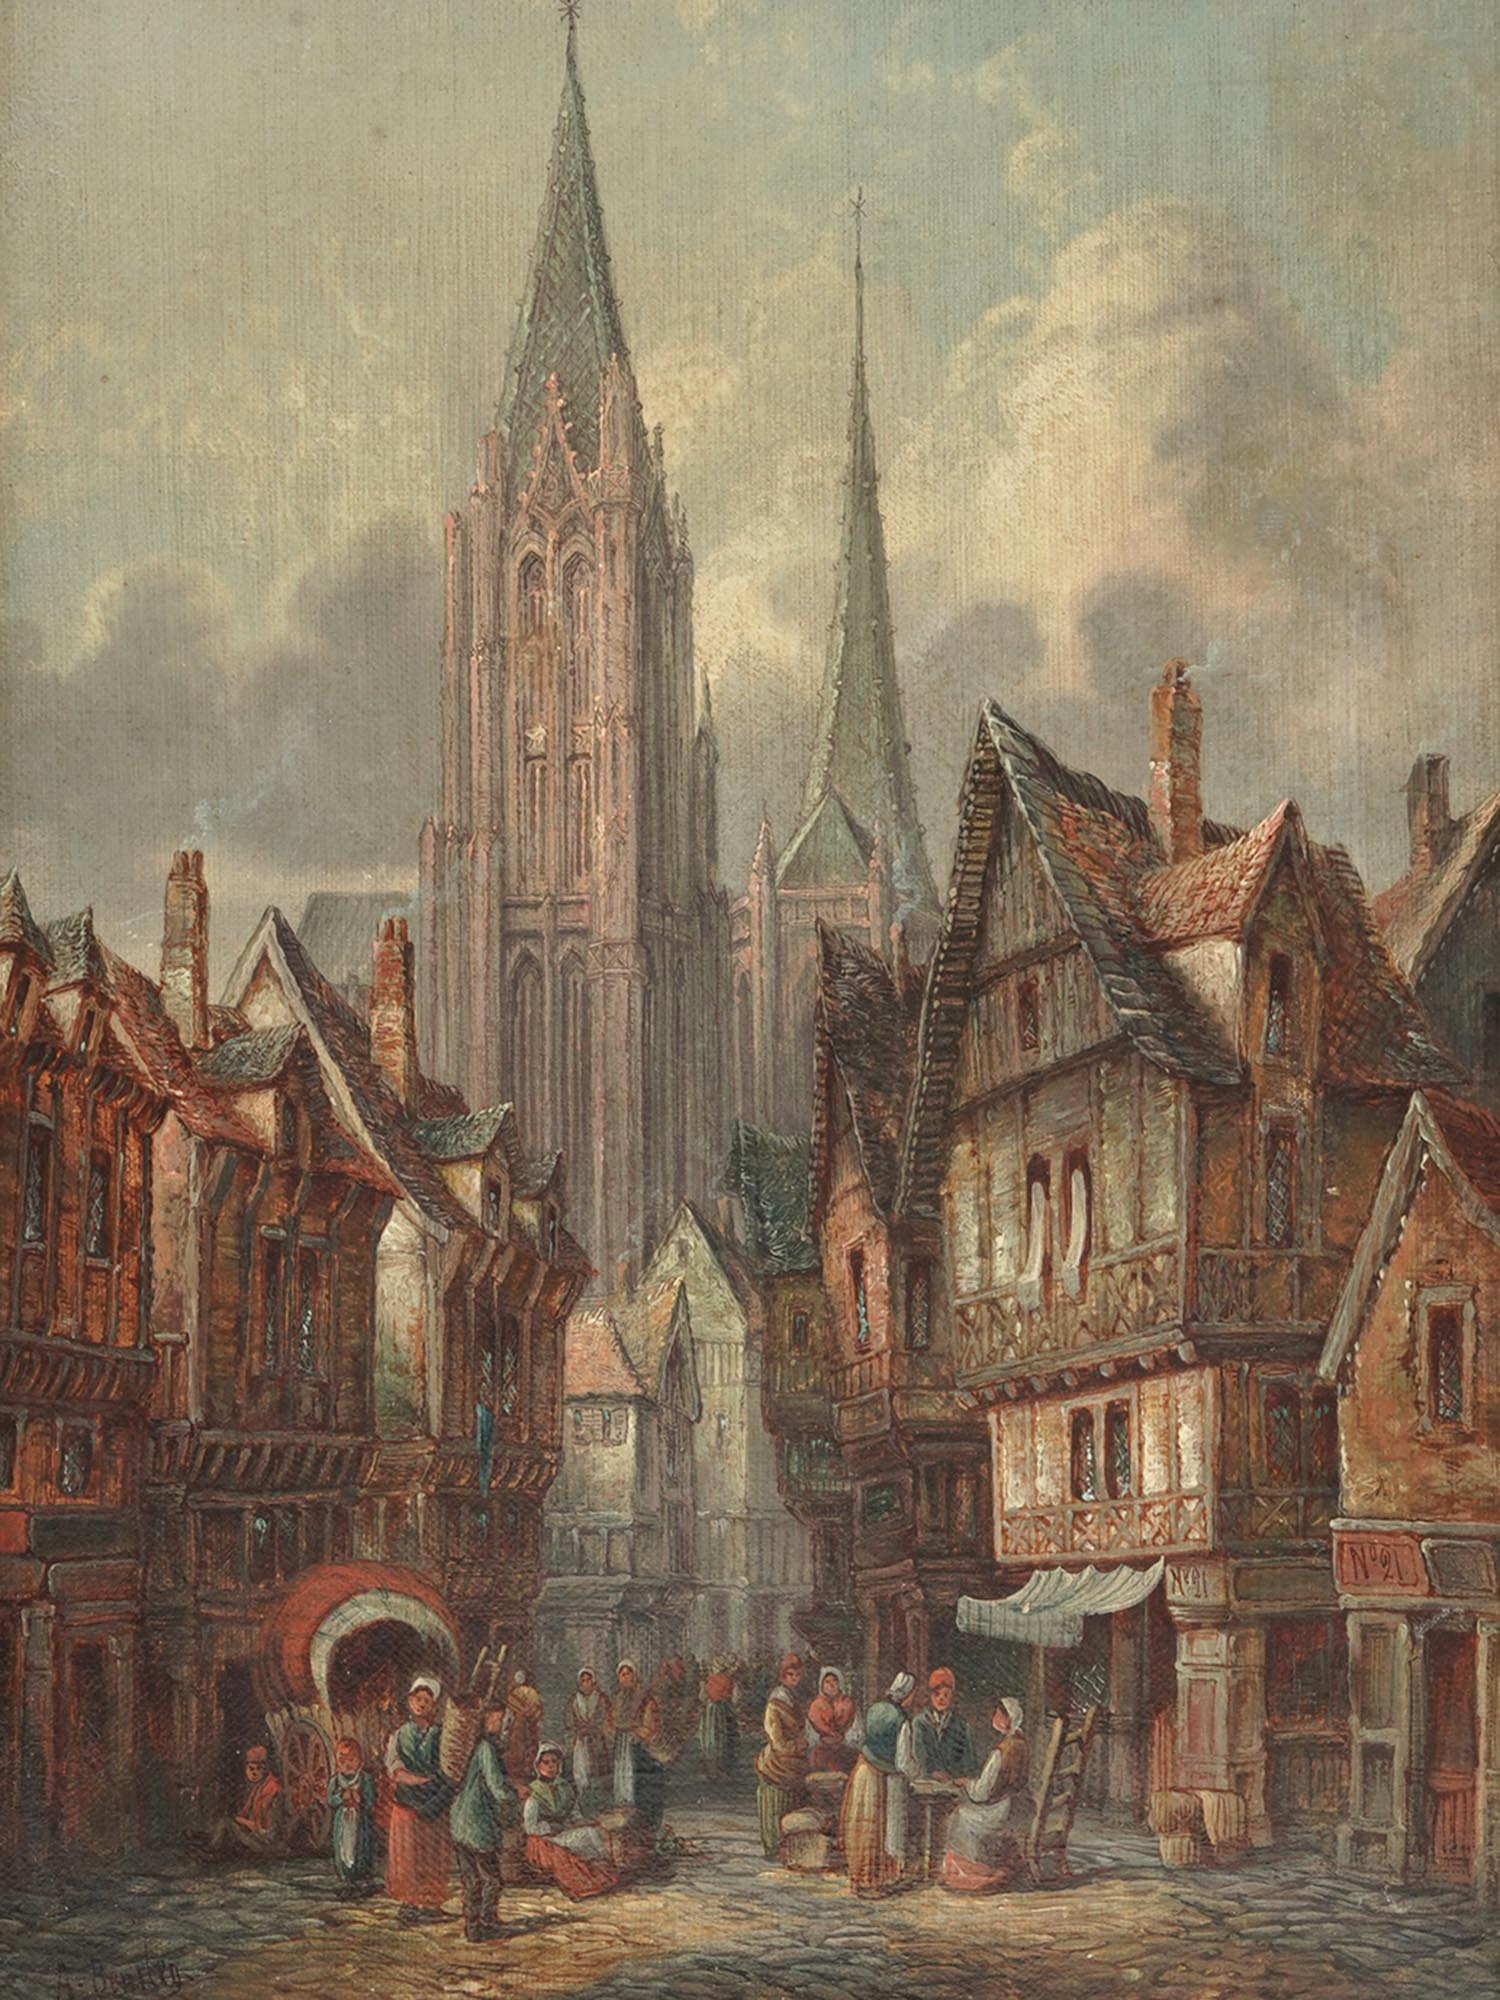 MEDIEVAL CITYSCAPE OIL PAINTING BY ALFRED BENTLEY PIC-1